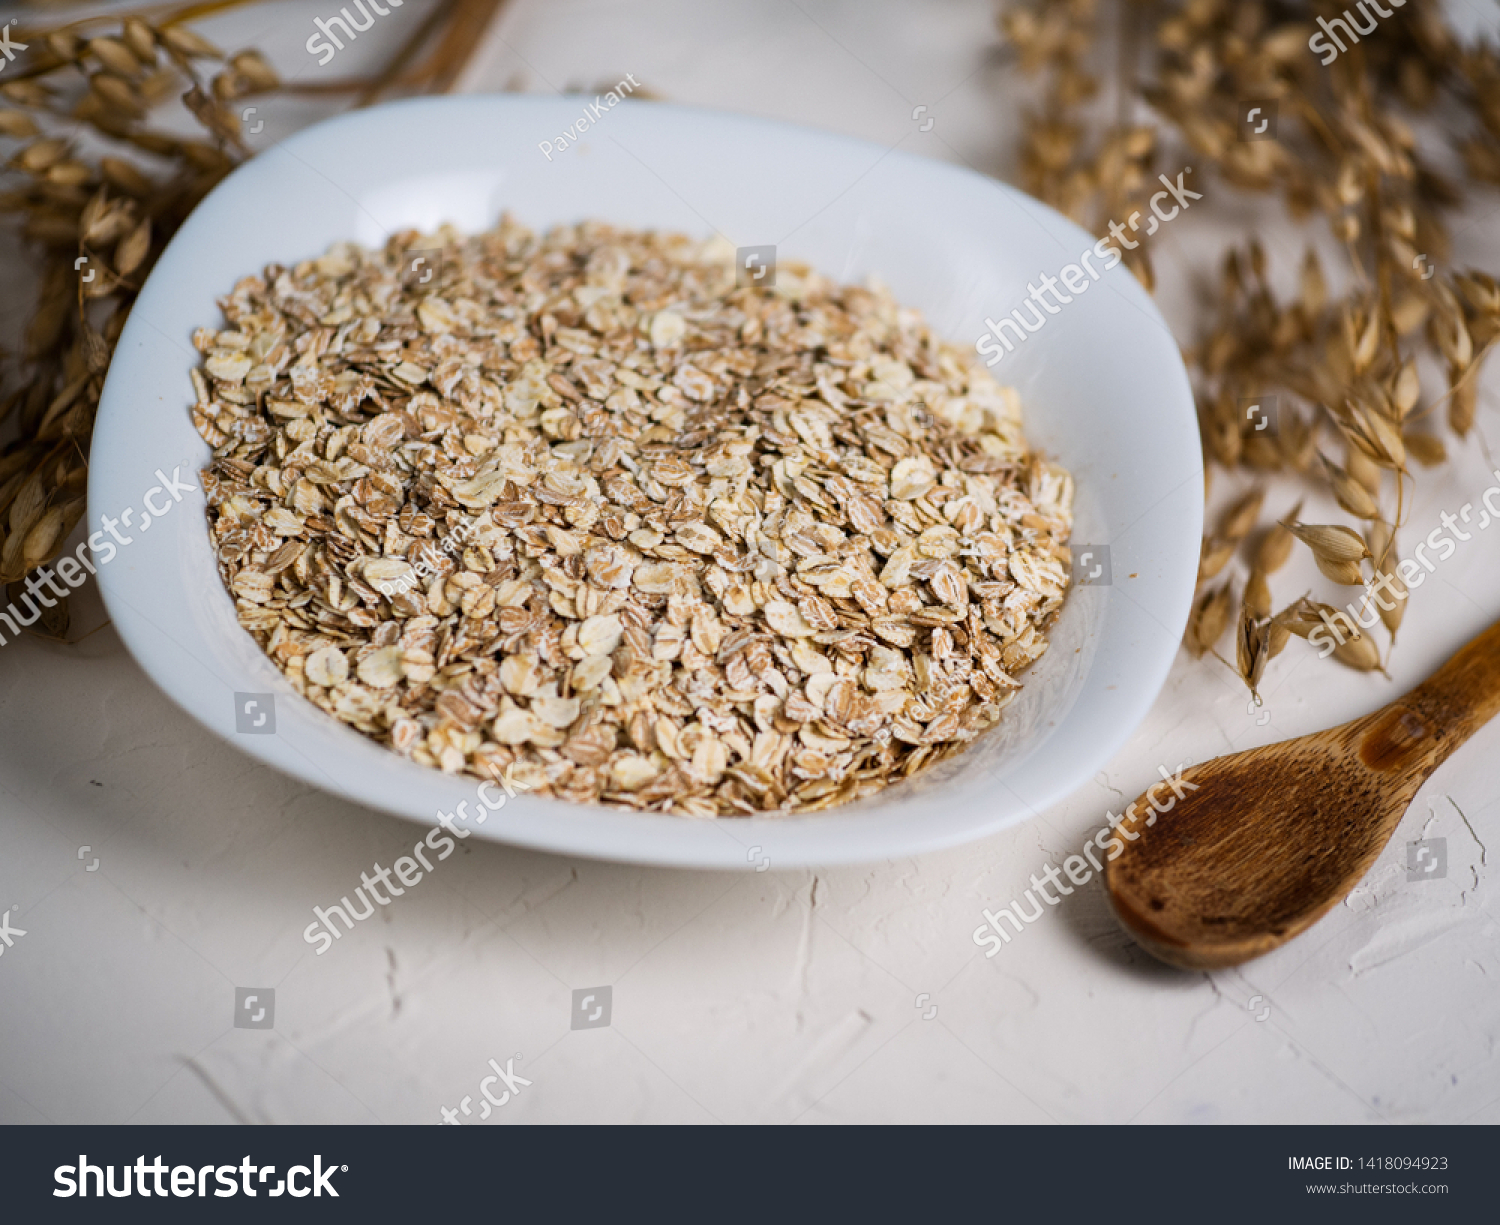 Oat flakes and ears of oats. Oatmeal in a plate on the table. Healthy breakfast #1418094923